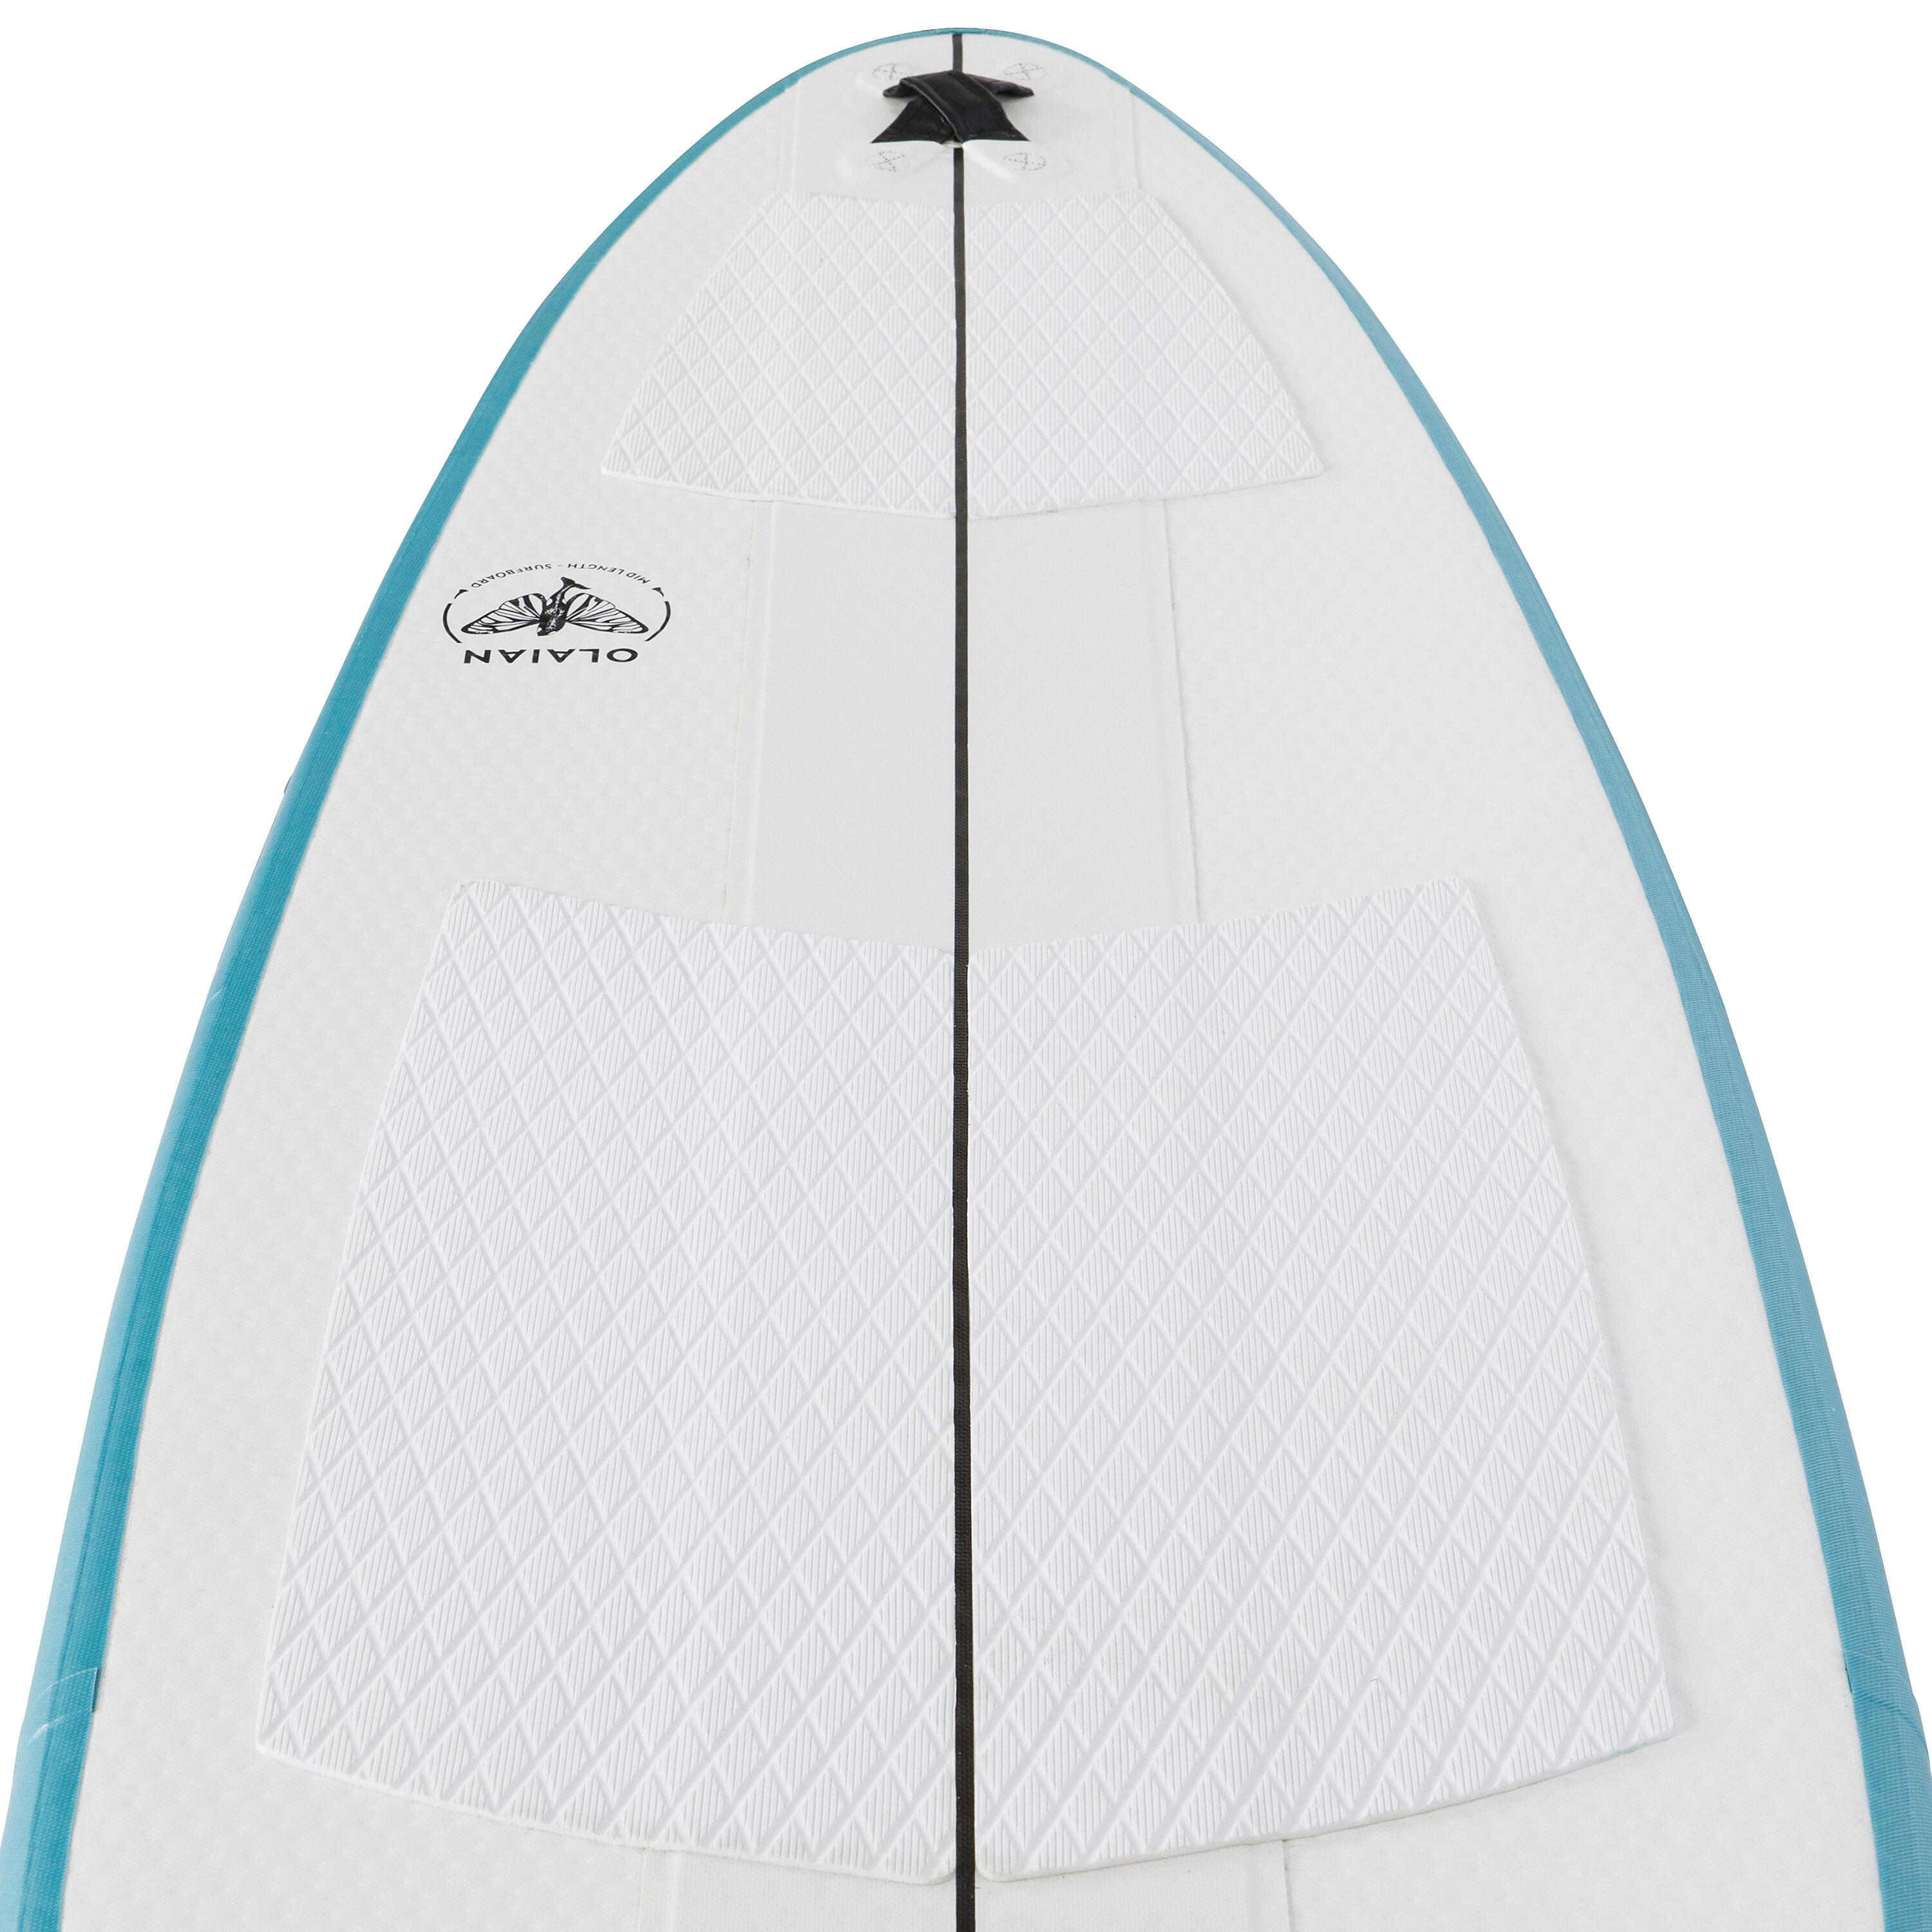 Compact inflatable surfboard 500 6'6” (without pump or leash) 7/14